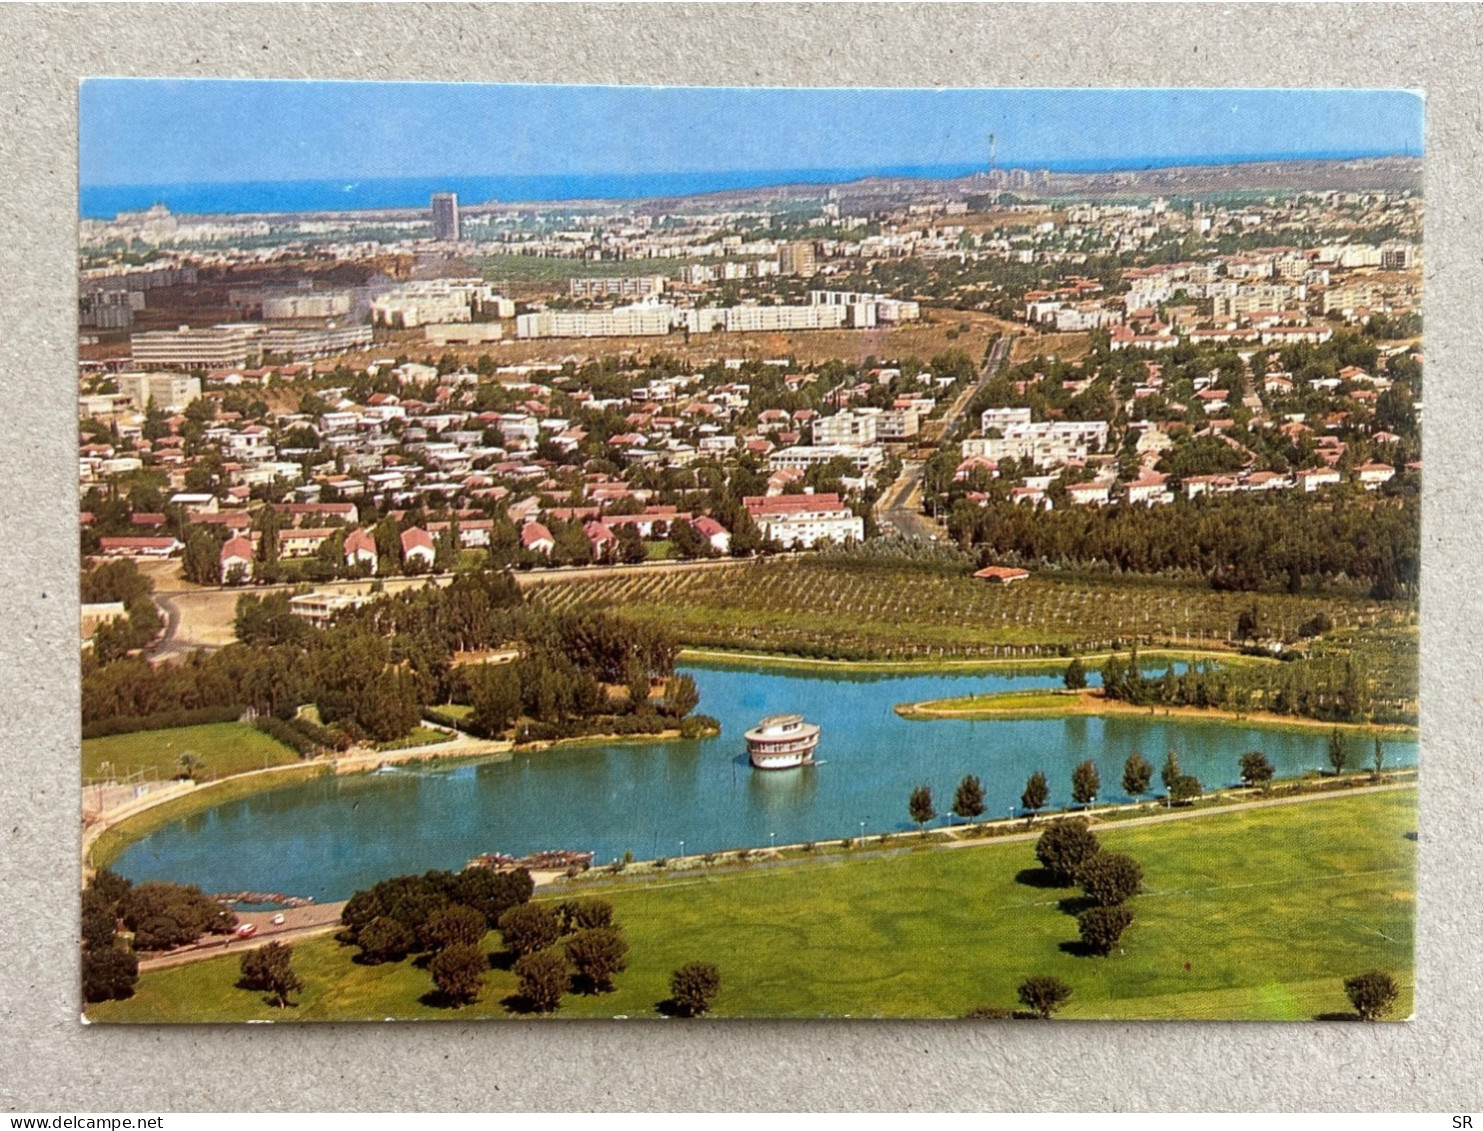 GEOGRAPHICAL POSTCARD - RAMAT GAN, The National Park, Ramat Chen, And The Tel Ganim Area In Givatayim From 1969 ISRAEL - Israel